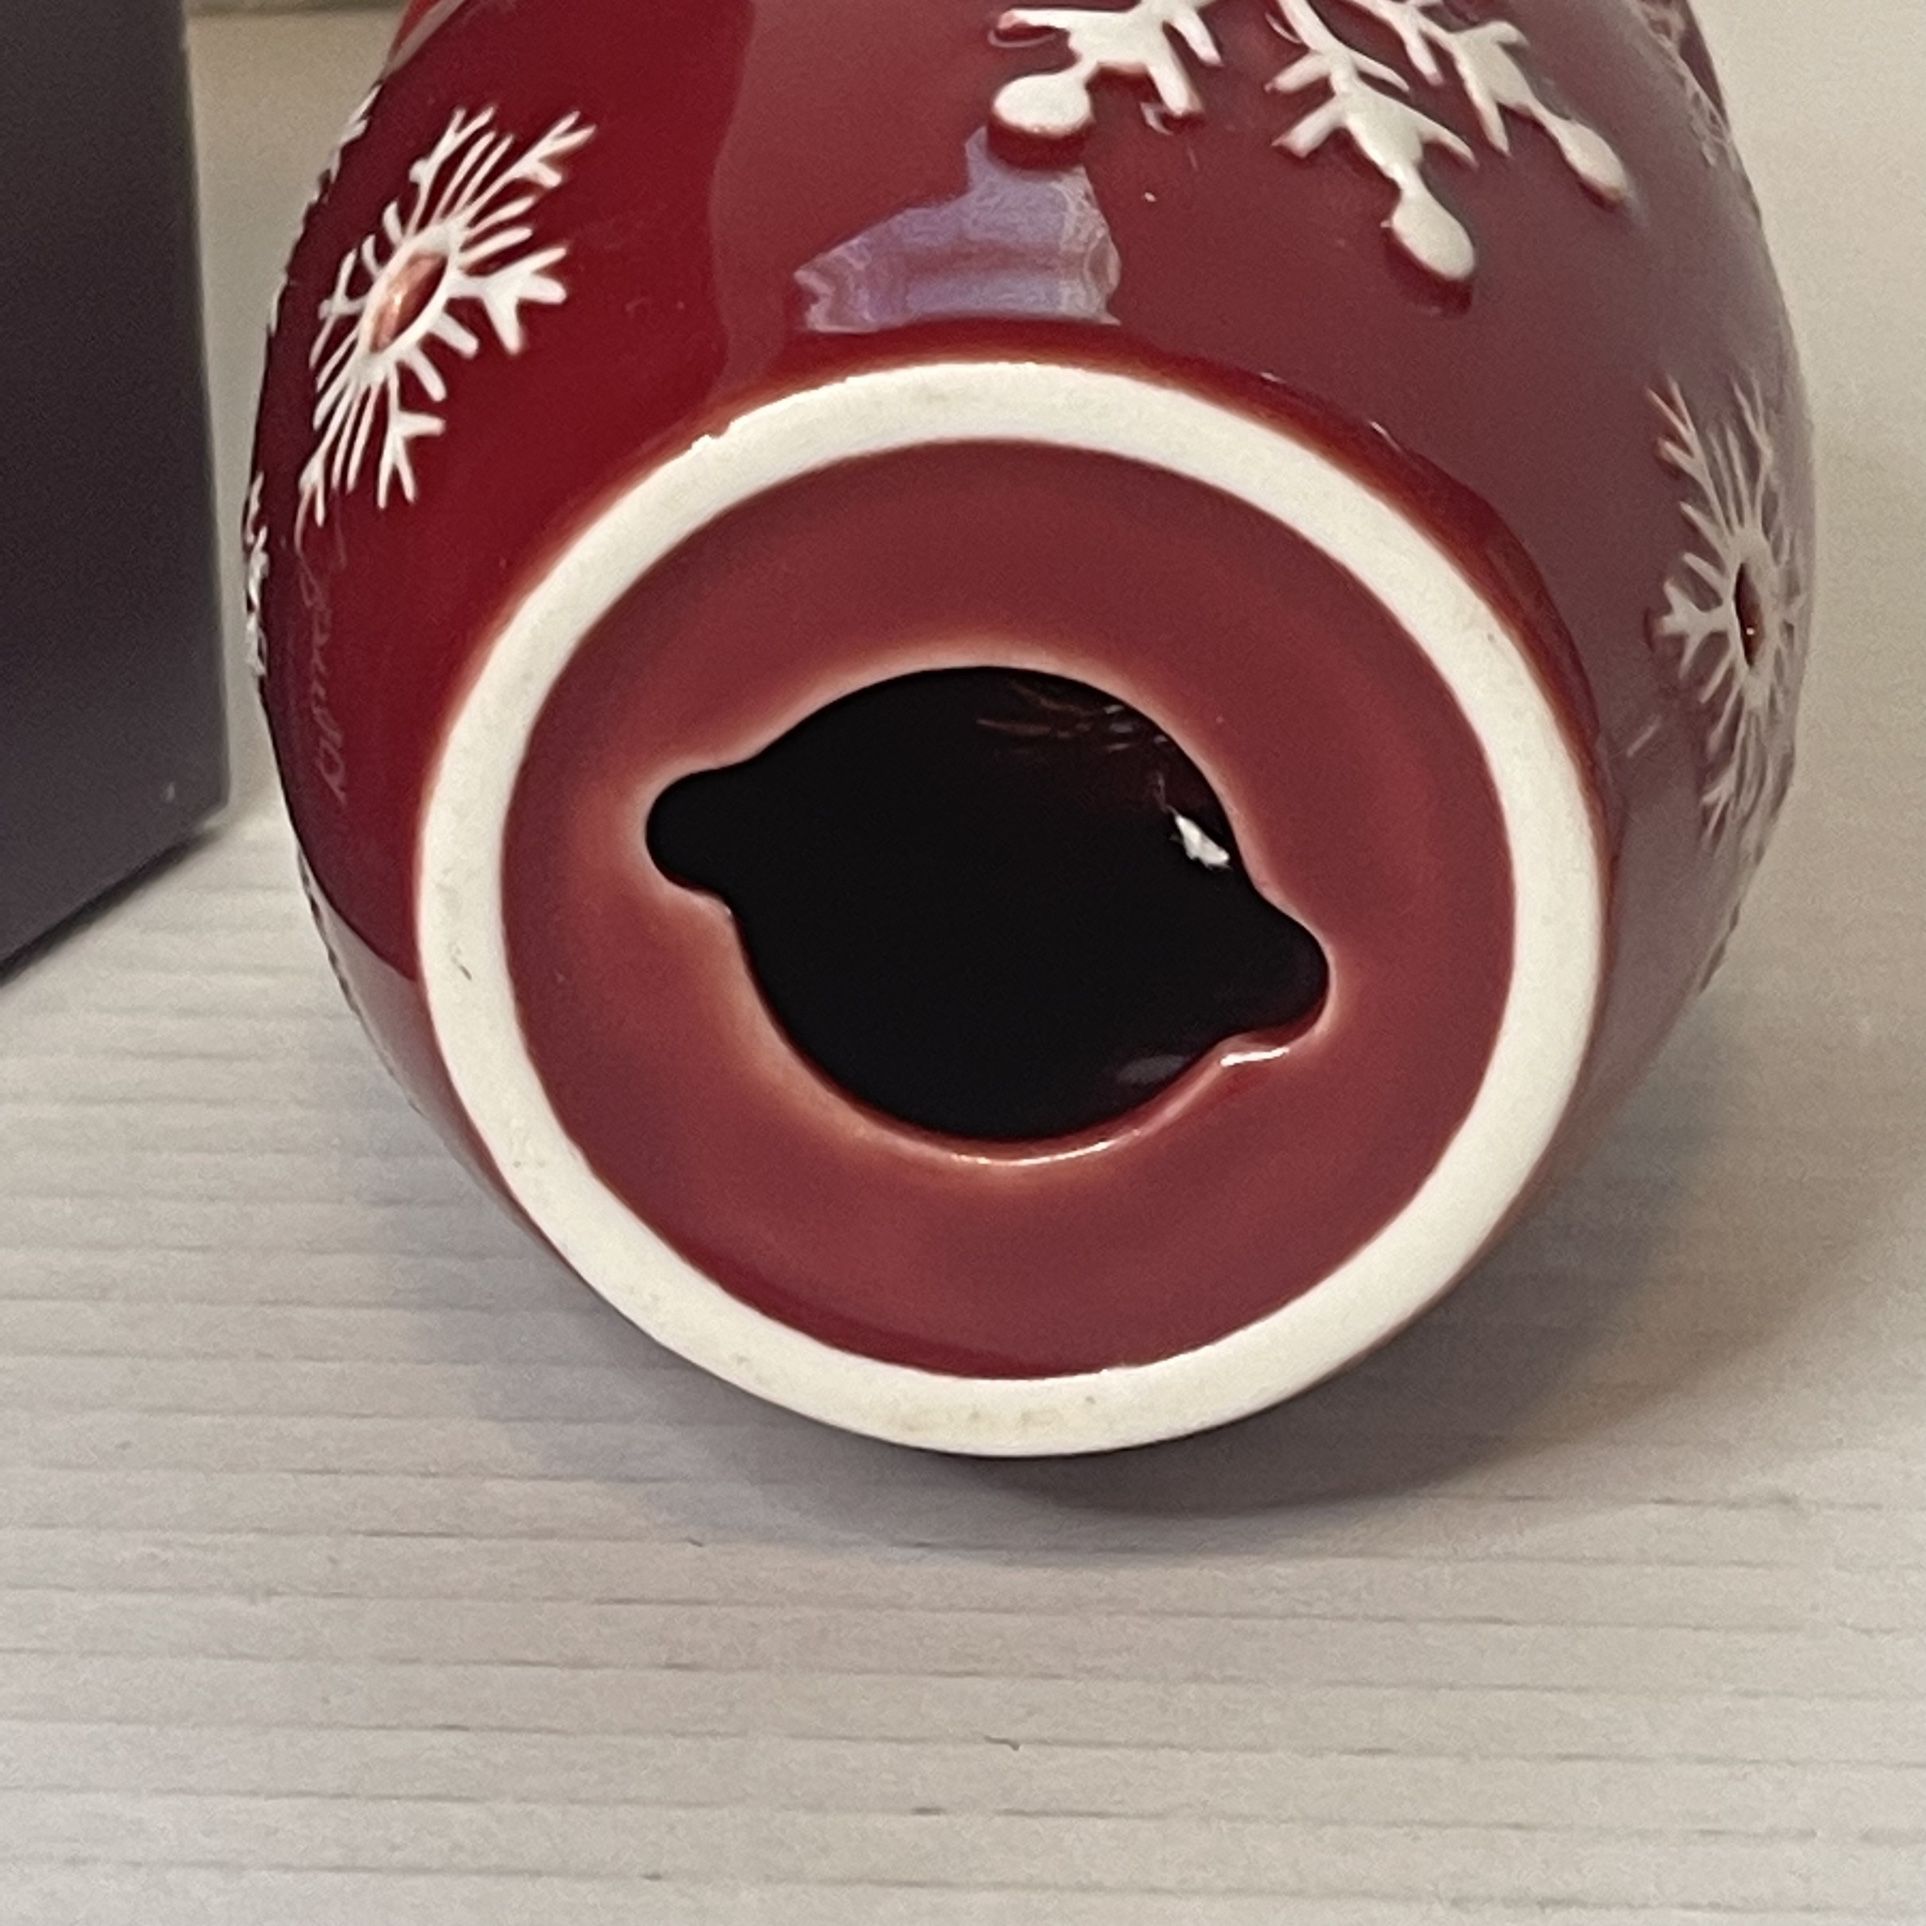 Scentsy Snowflake - Red plug in warmer with new bulb & 1 package of wax melts 